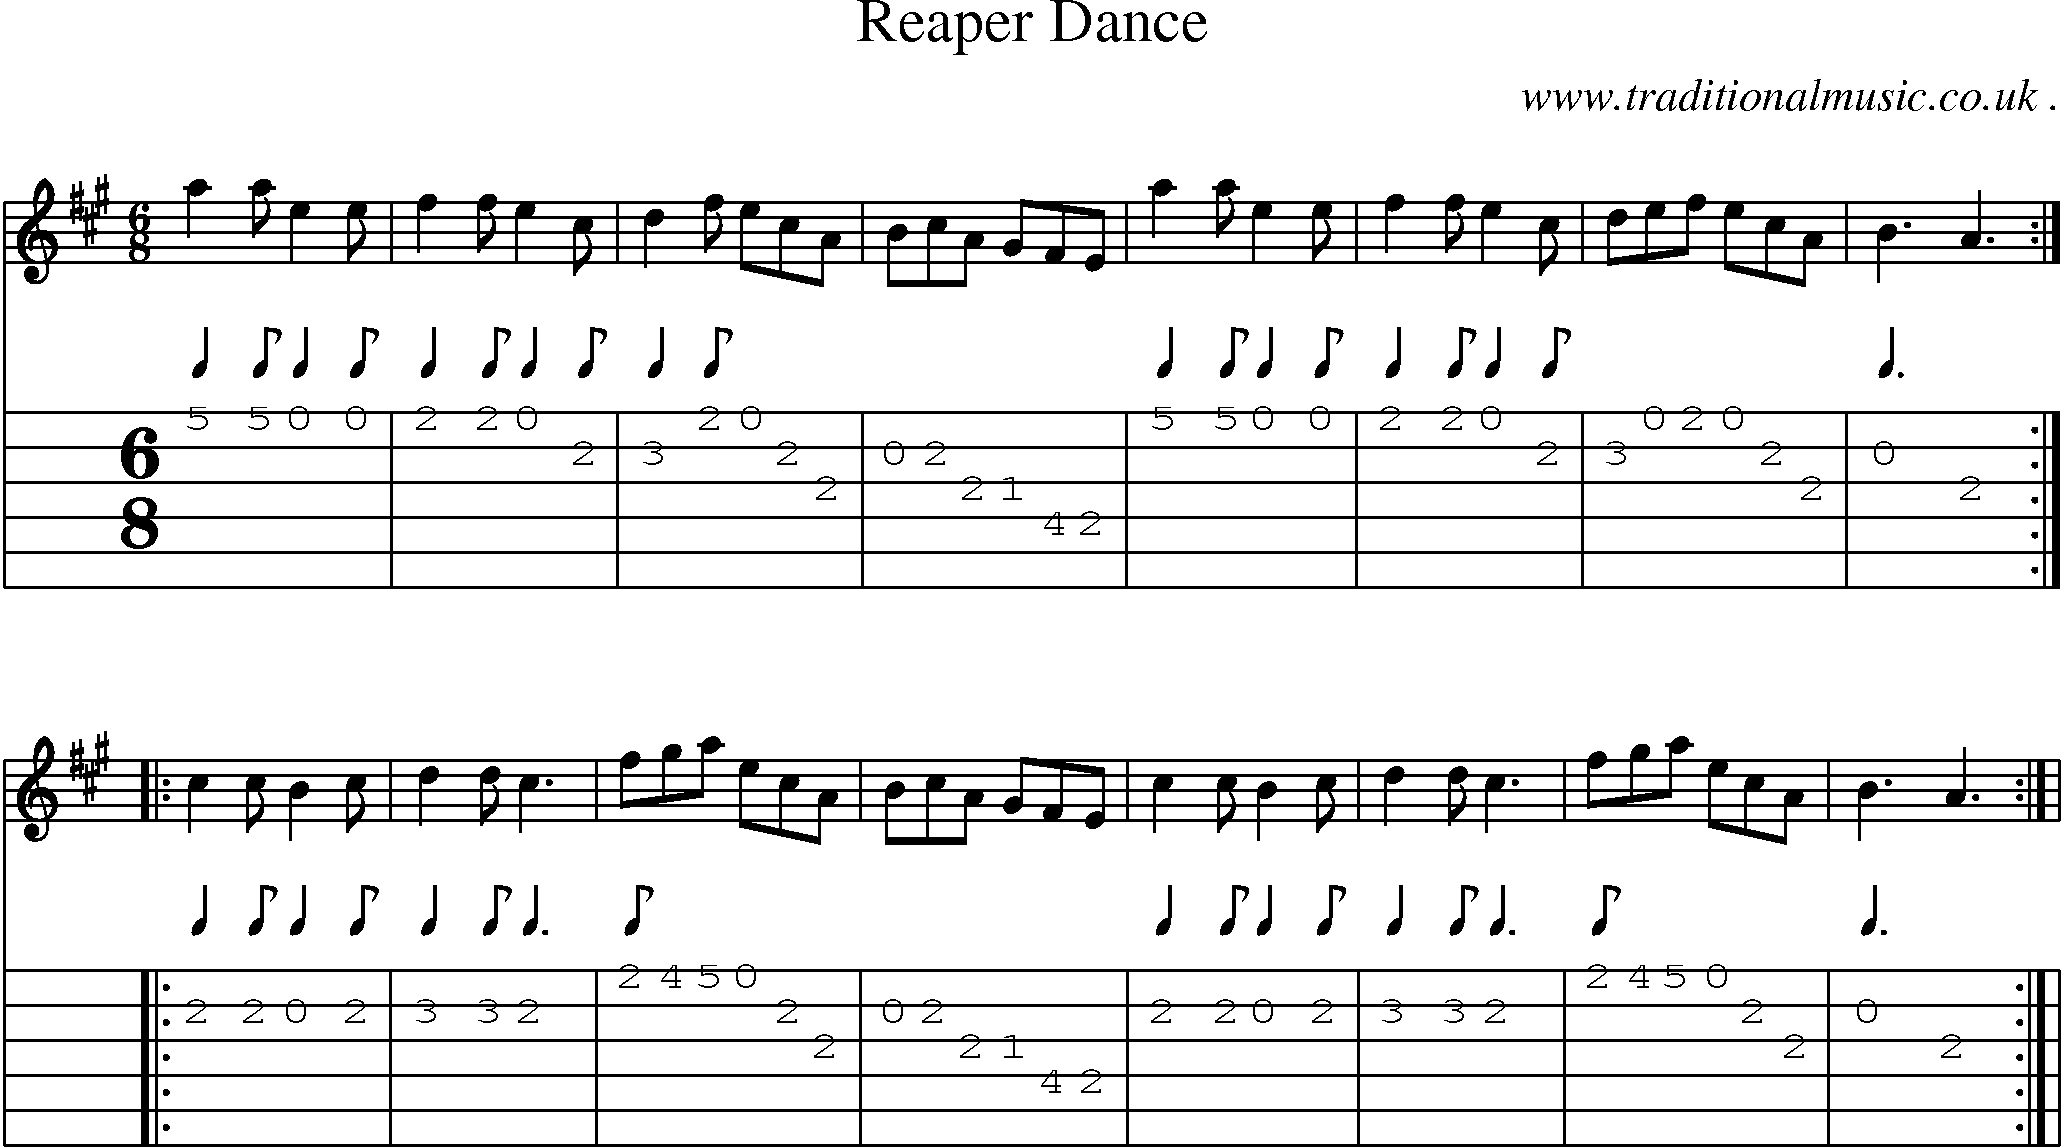 Sheet-Music and Guitar Tabs for Reaper Dance